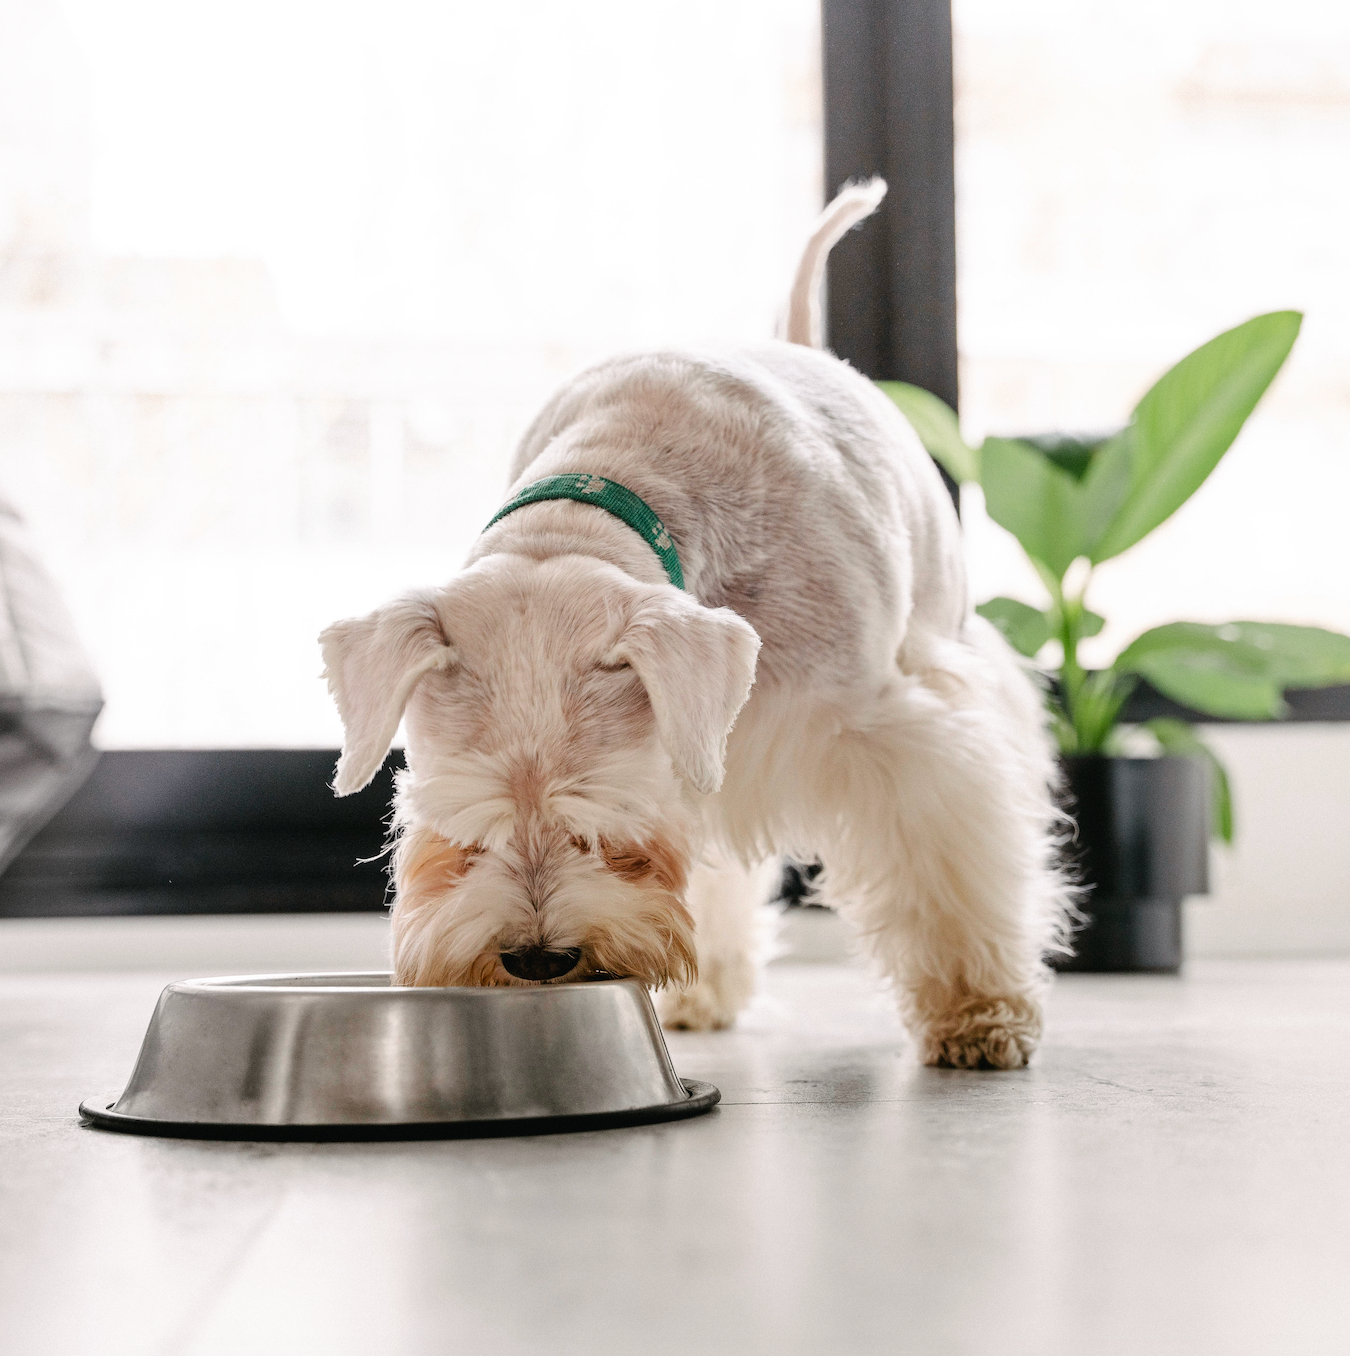 Let's Eat: Feeding Your Pet a Healthy Diet